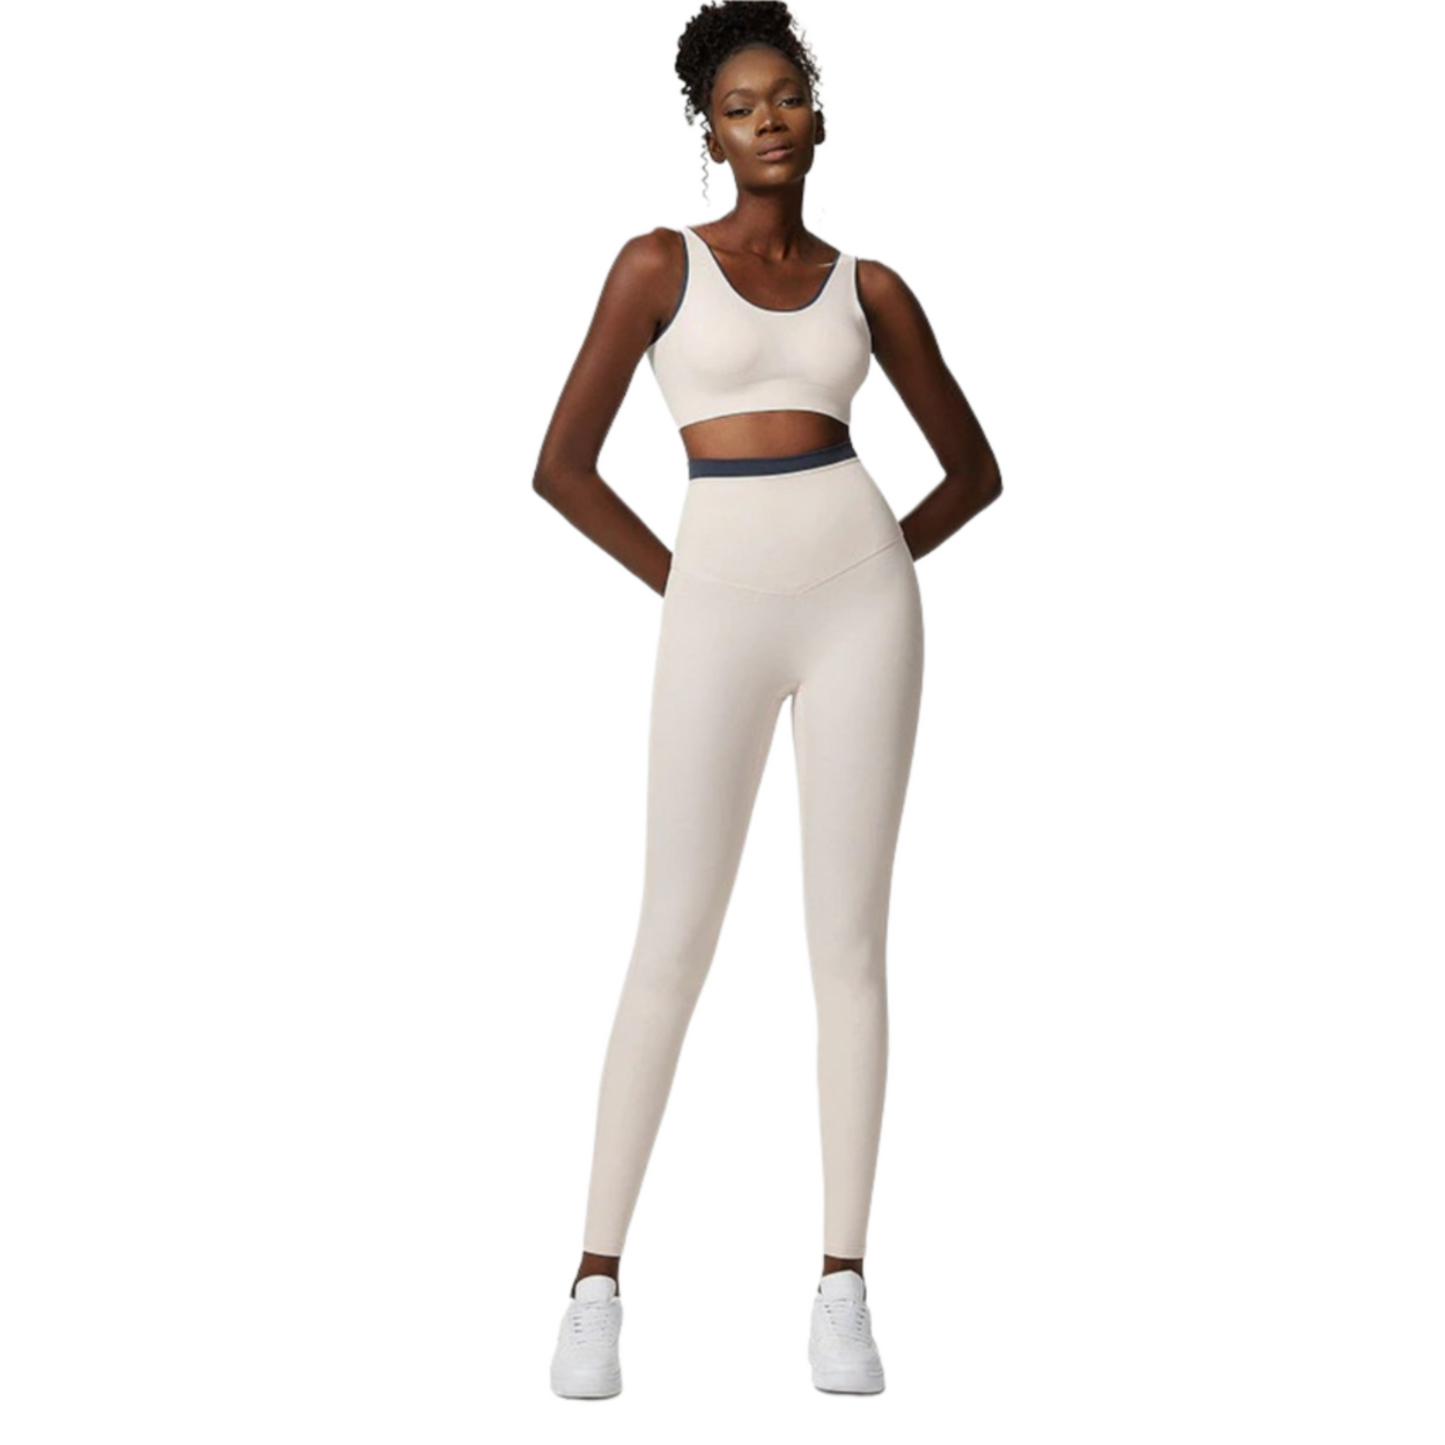 African American model wearing an off white, high waisted, squat proof matching workout set from Vibras Activewear.